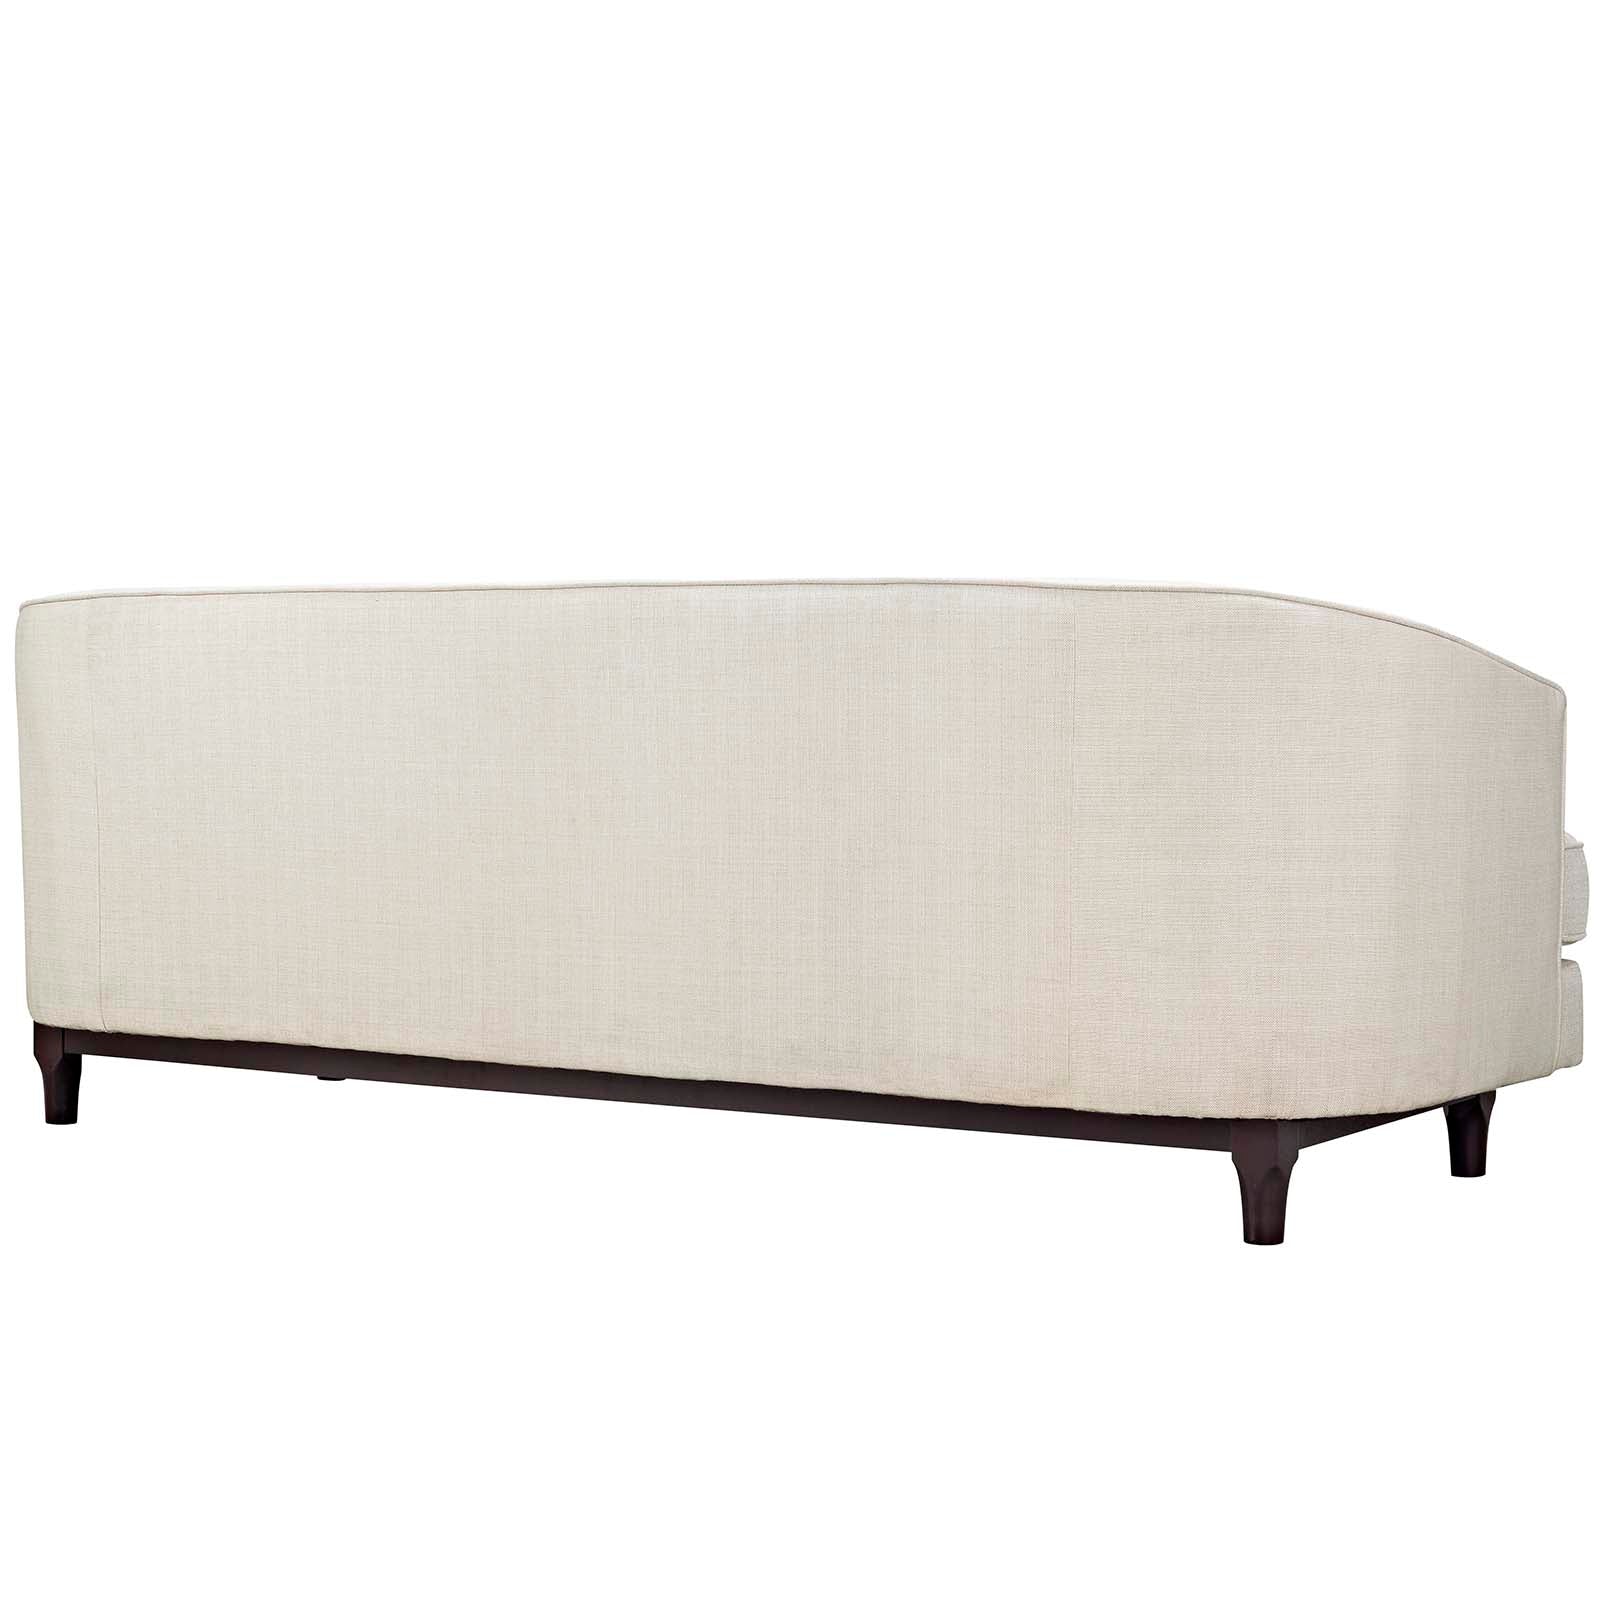 Modway Sofas & Couches - Coast Upholstered Fabric Sofa Beige